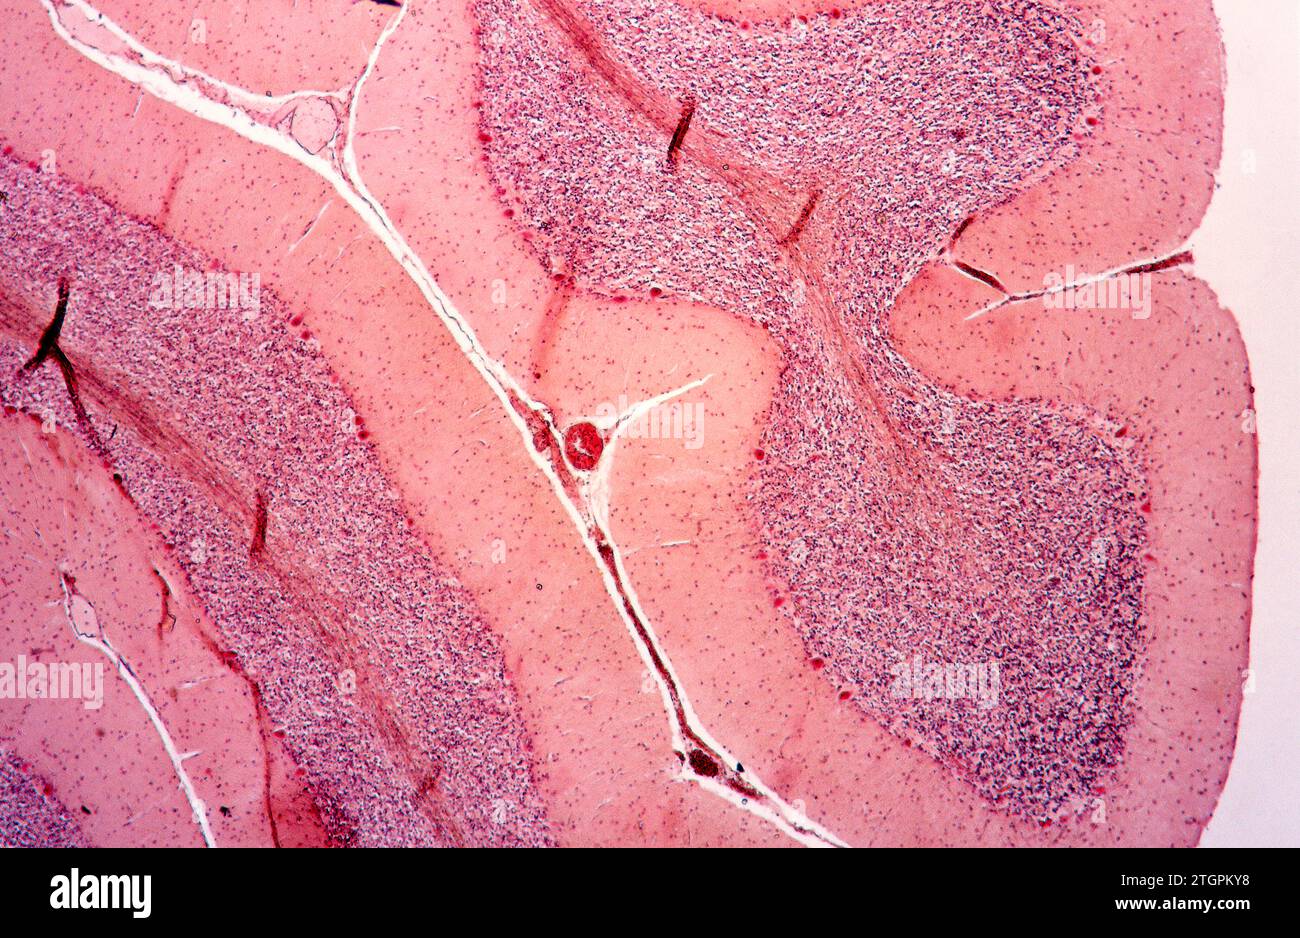 Human cerebellum section showing fisures, neurons, Purkinge cells and blood vessel. Photomicrograph. Stock Photo